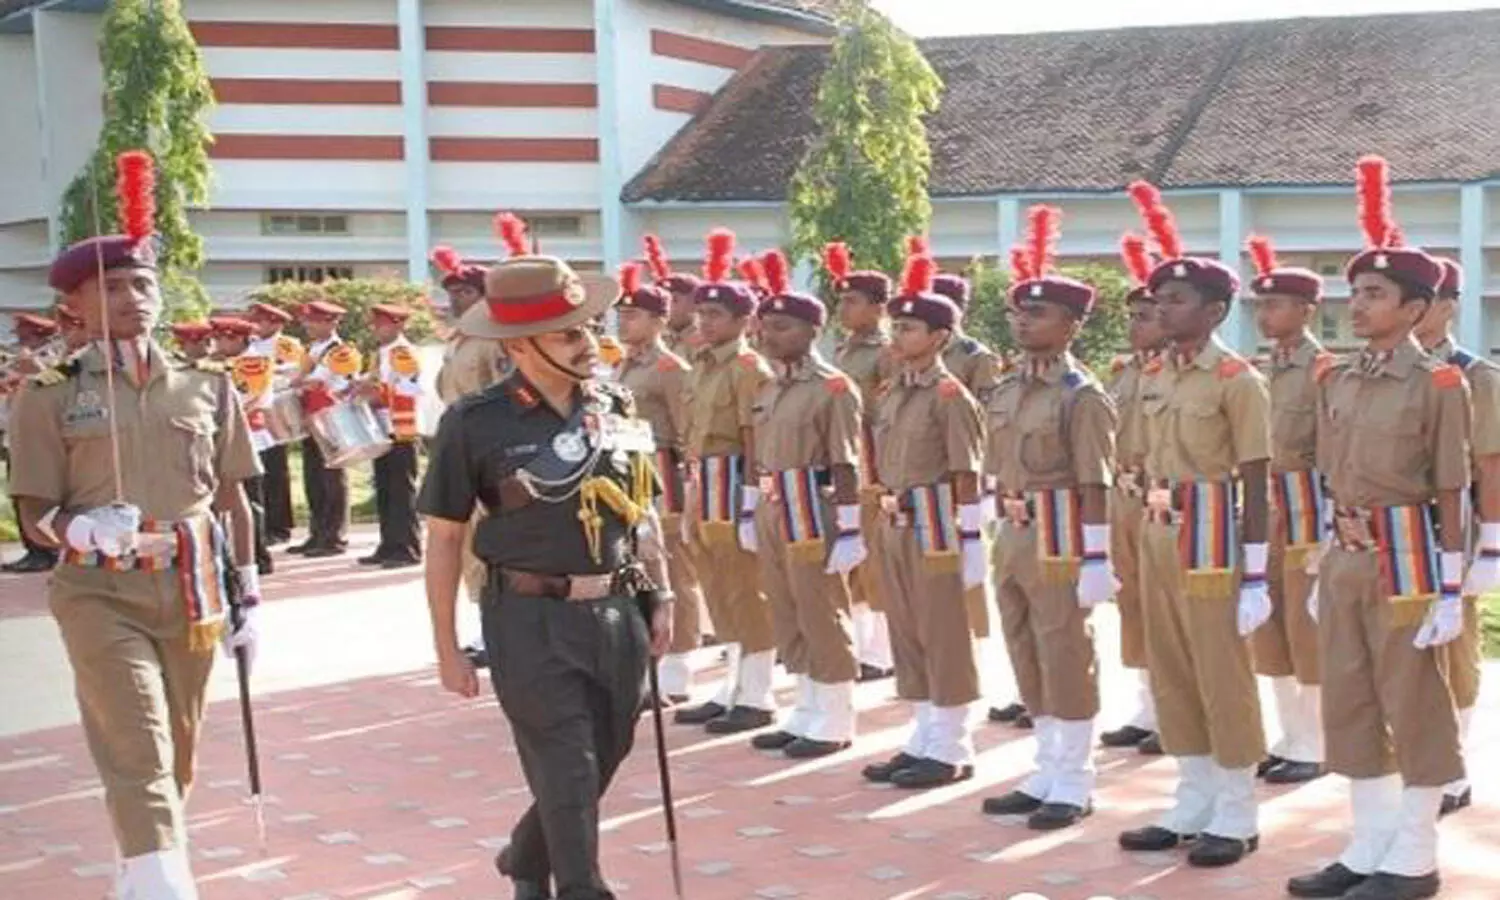 Sainik School Recruitment 2021: Vacancies announced for TGT and other posts, check details here